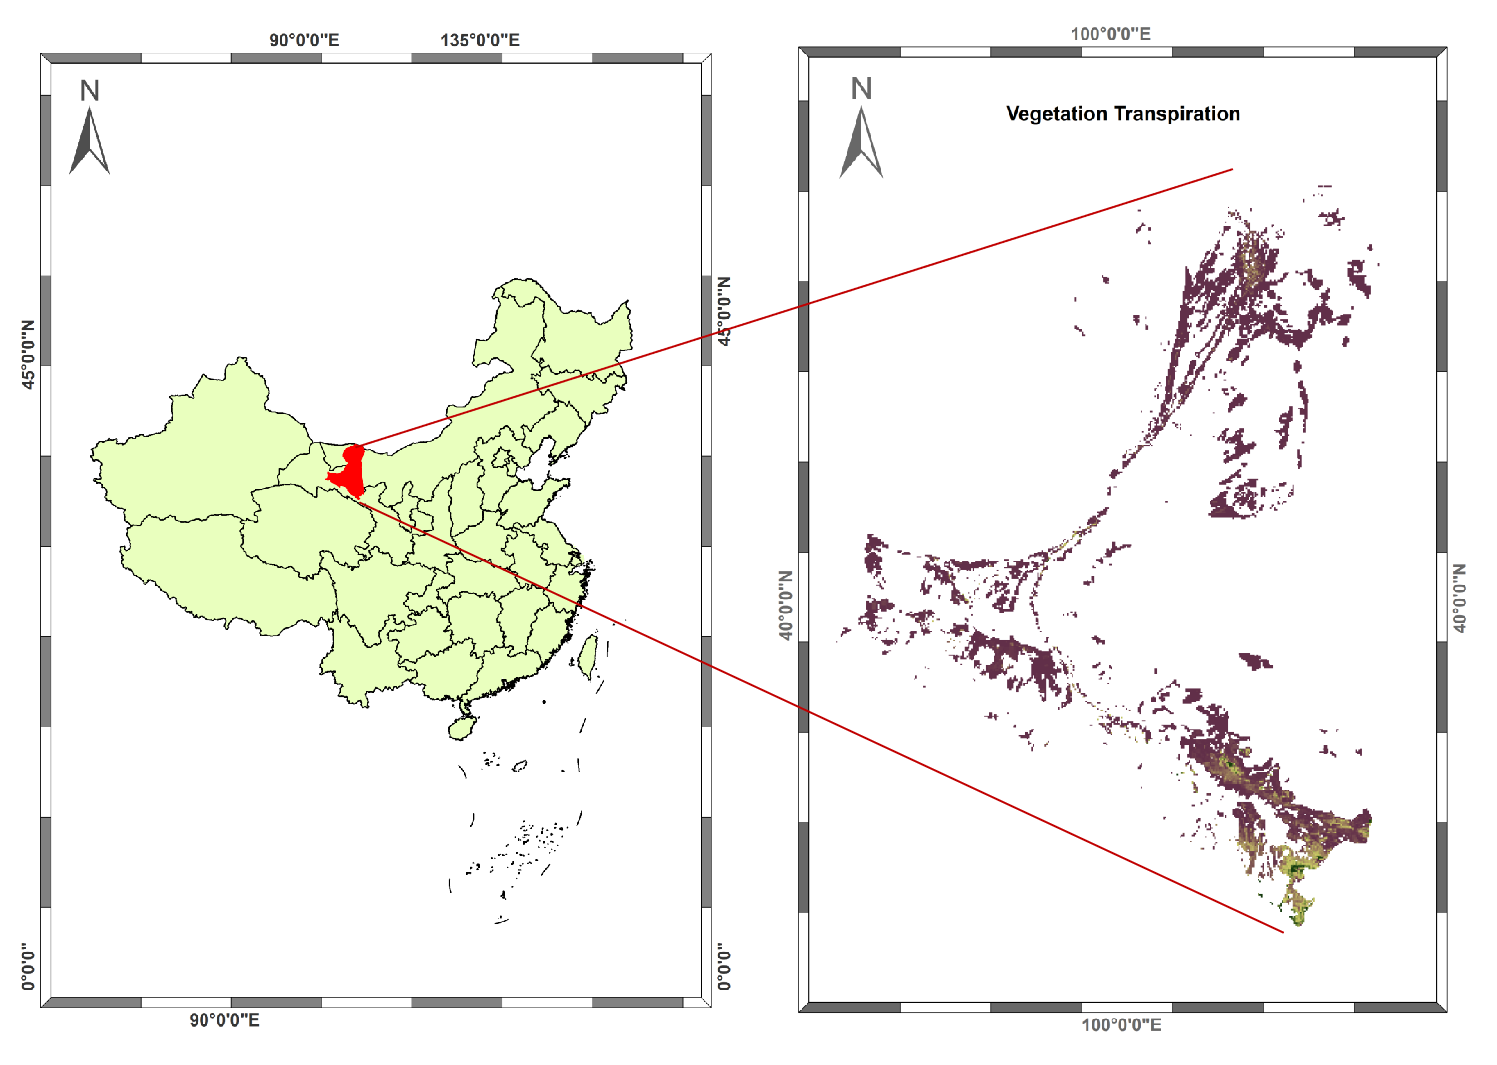 Modeling results of vegetation transpiration in the middle and lower Heihe River Basin at the north of Qilian Mountains (2001-2015)